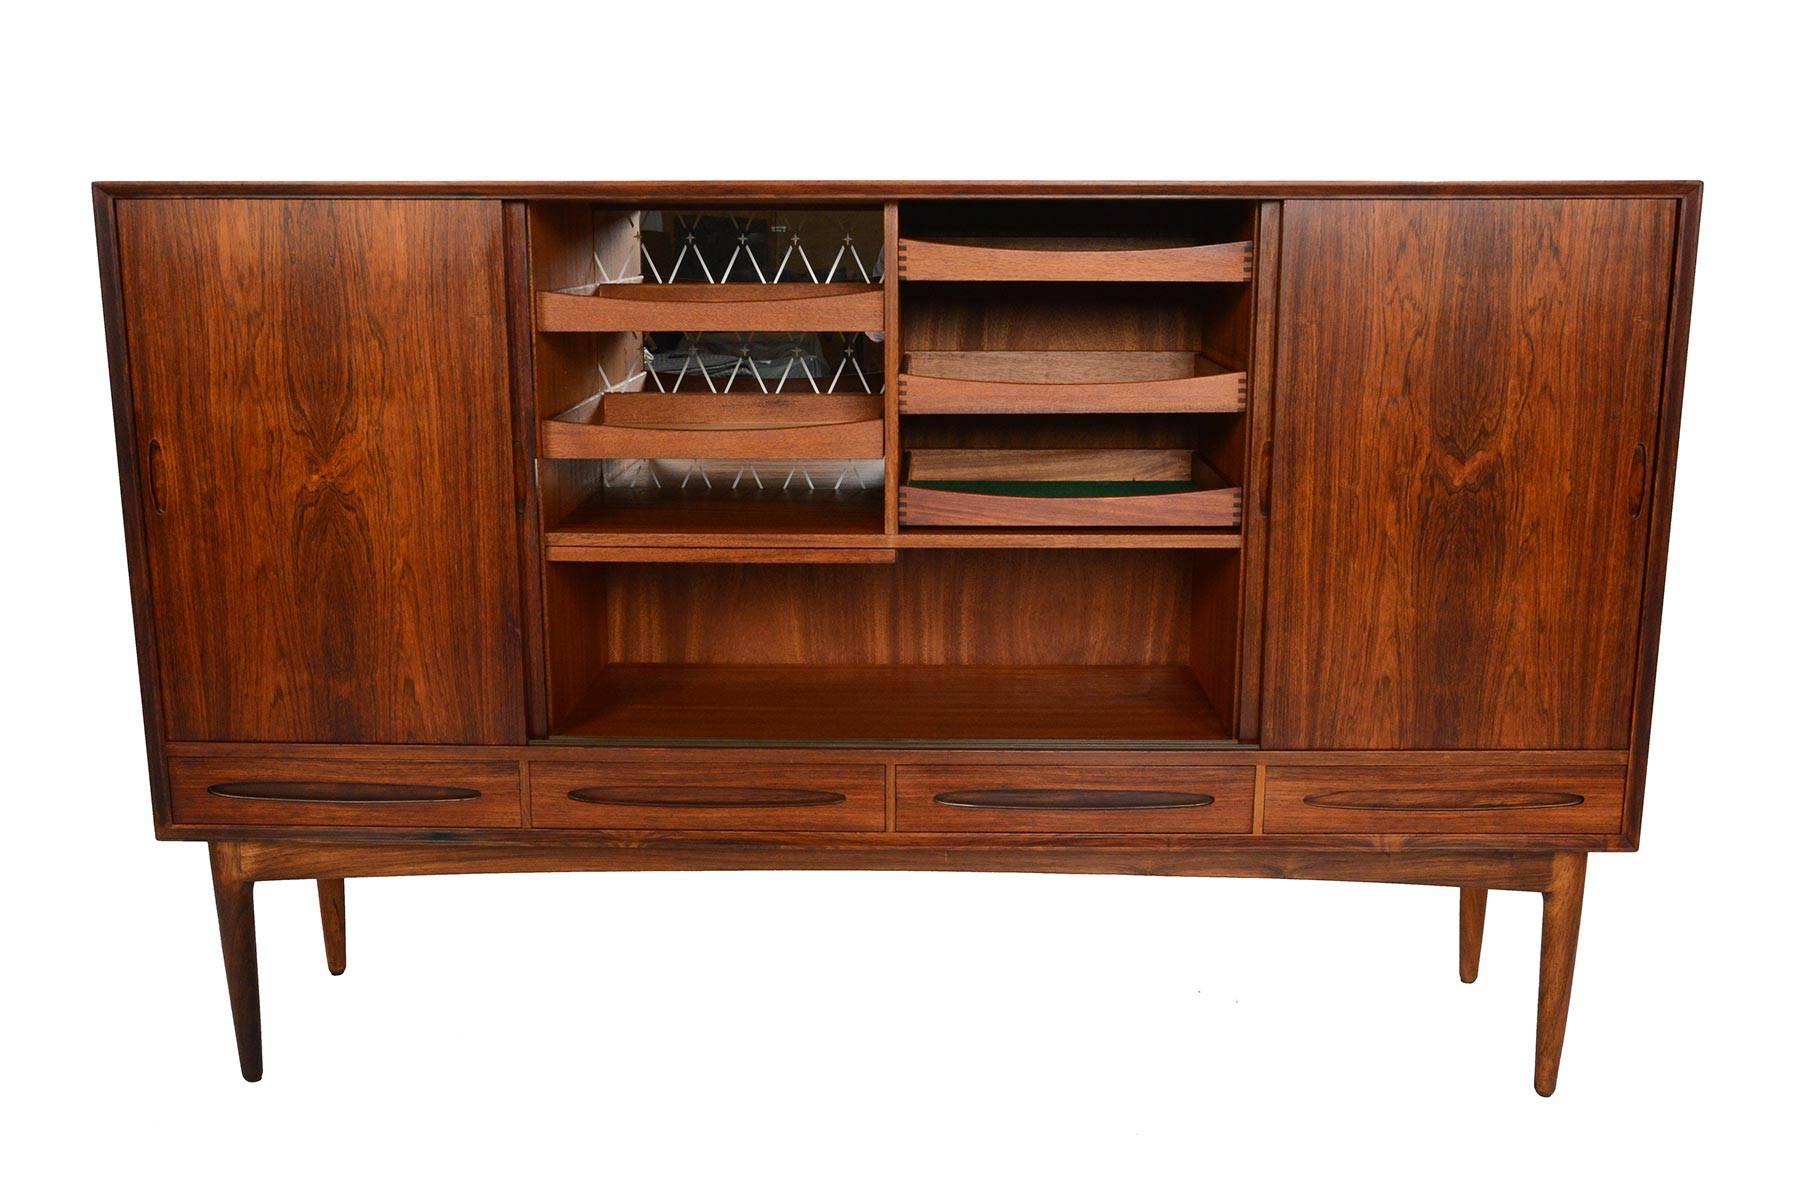 This tall Danish modern midcentury credenza is crafted in Brazilian rosewood and showcases gorgeous active grain patterning throughout. Four large doors slide open to reveal three bays. The left and right bays house six adjustable shelves while the